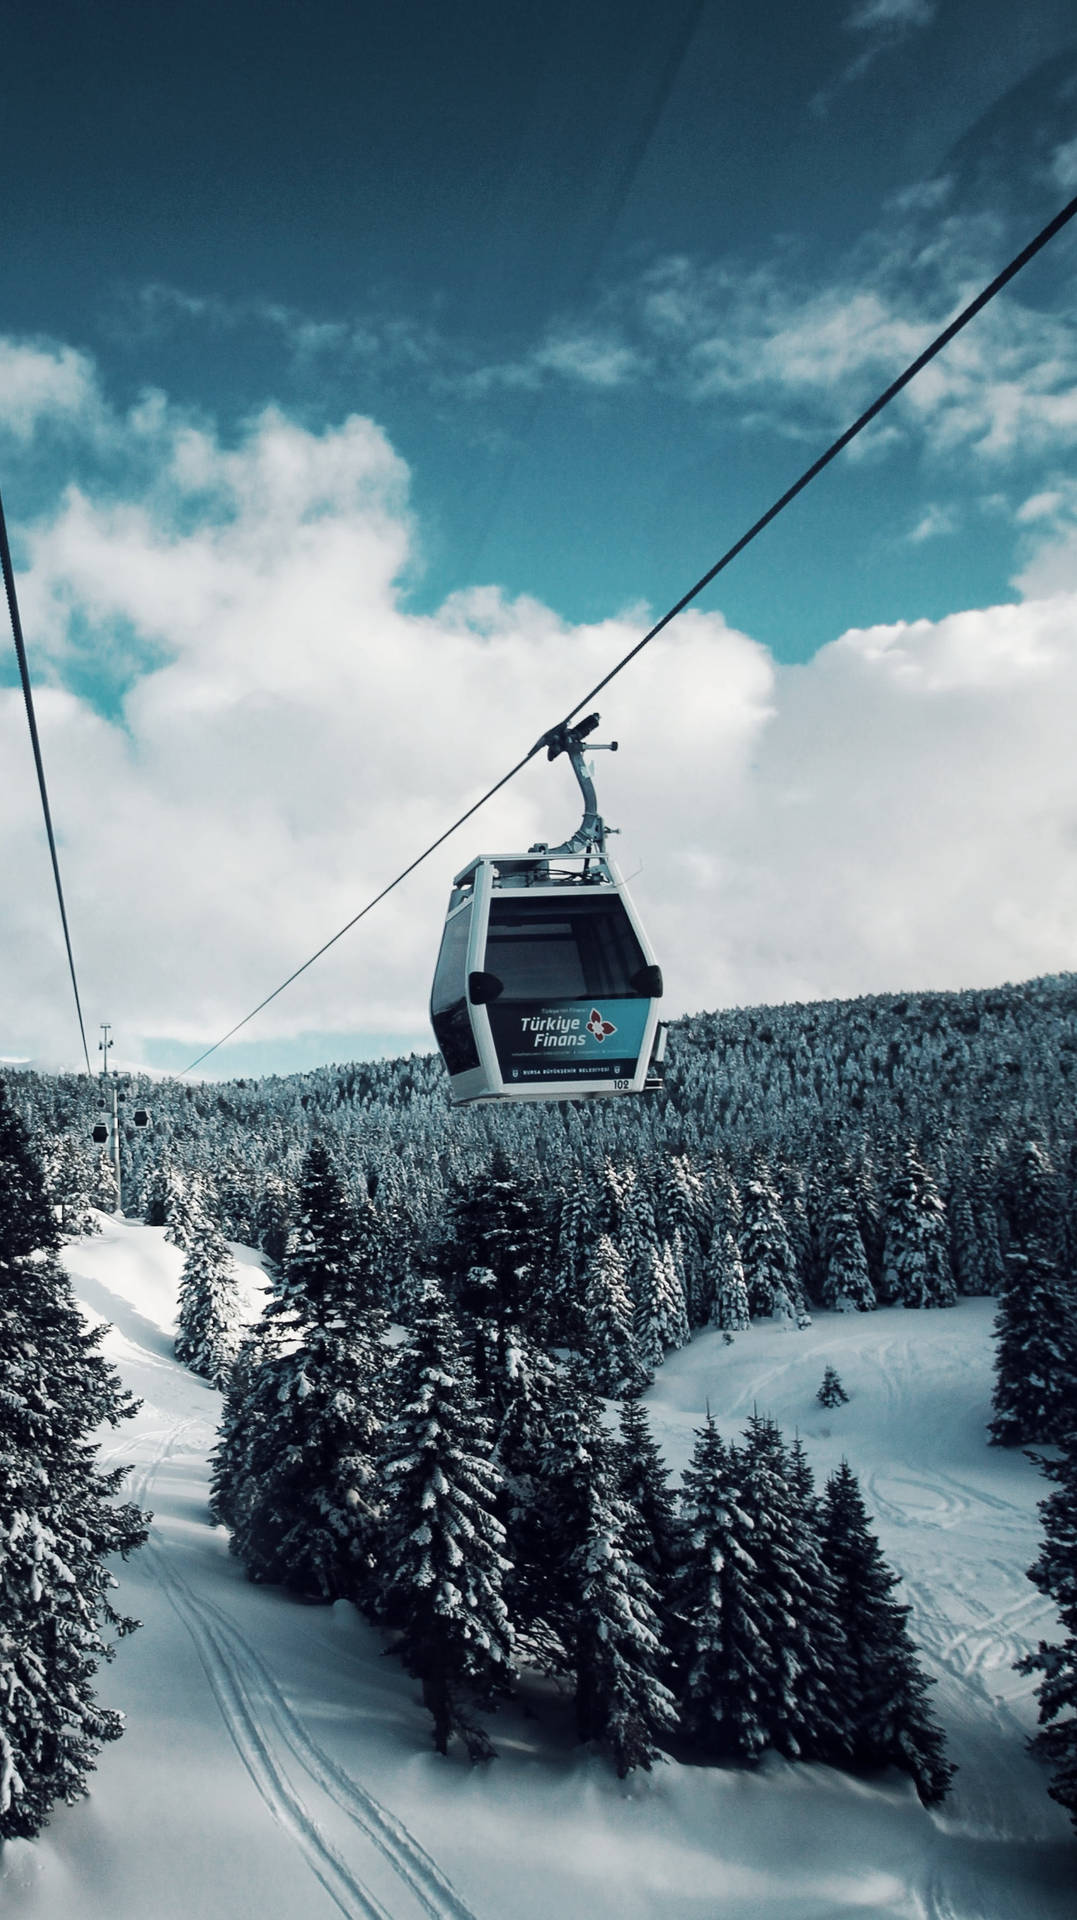 Winter Phone Turkey Cable Car Background